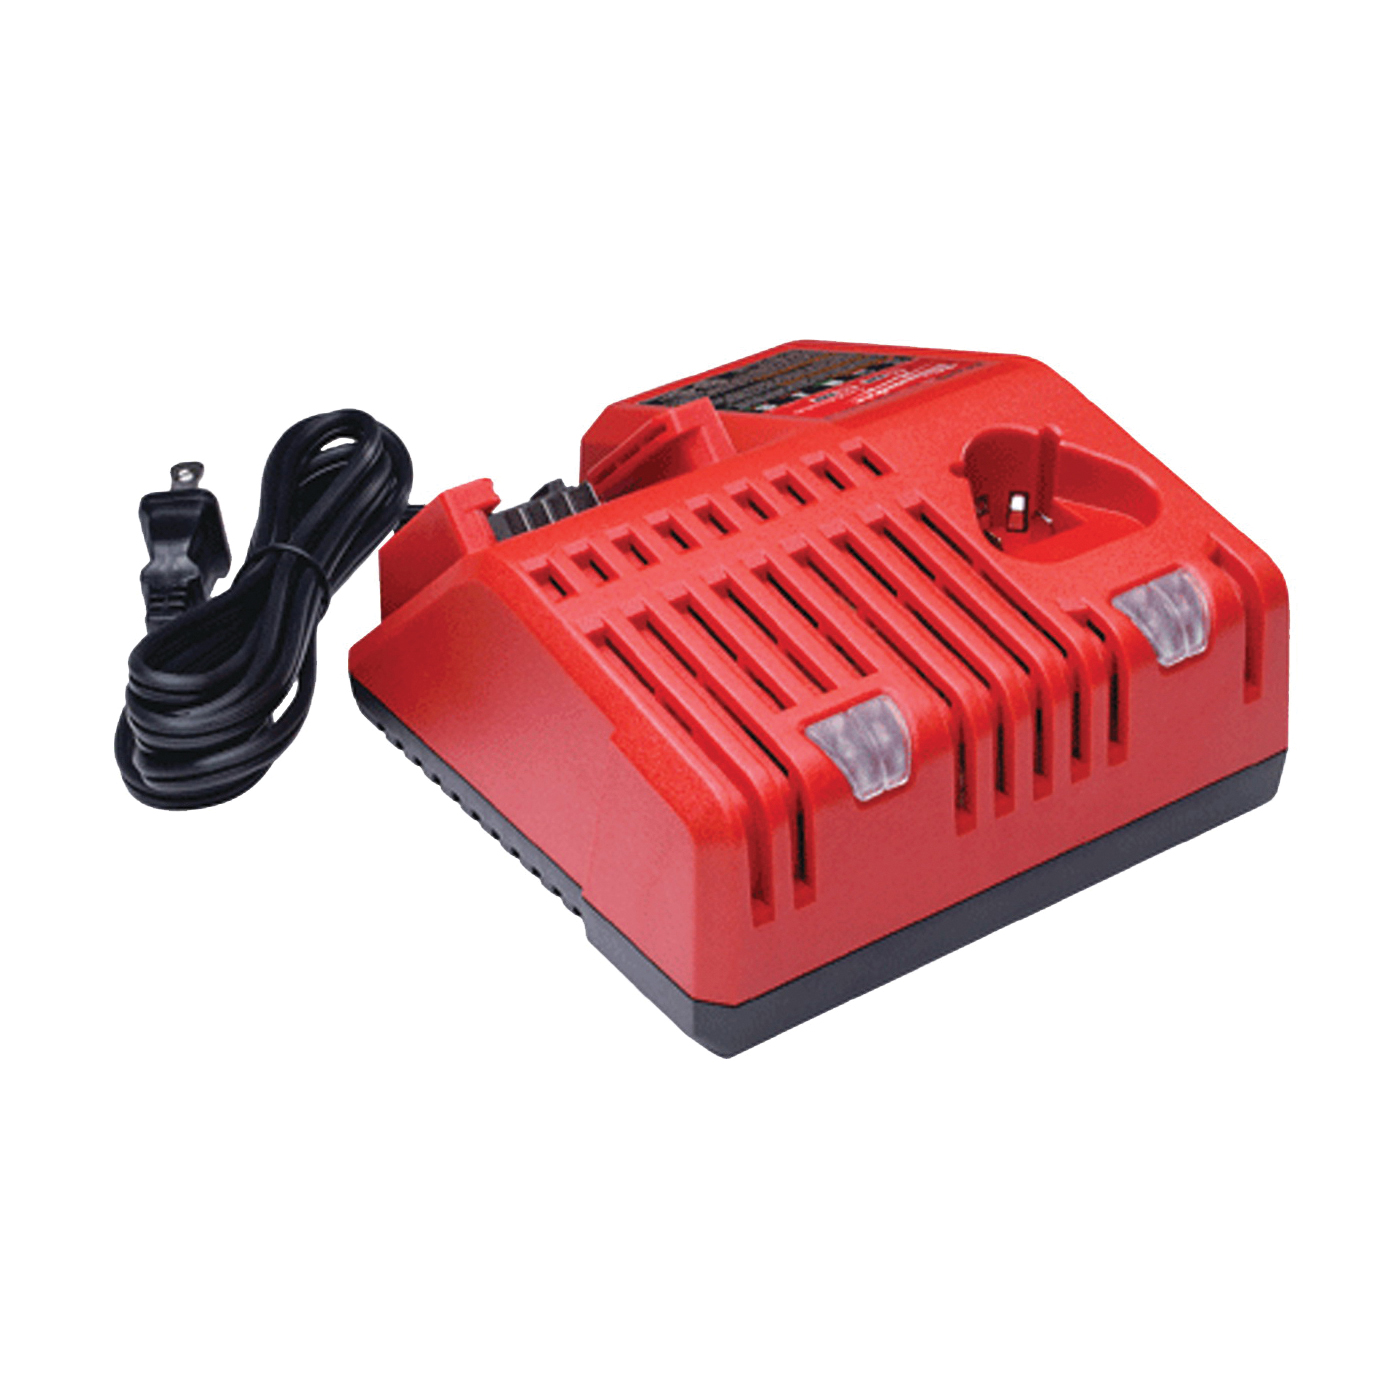 Milwaukee 48-59-1812 Multi-Voltage Charger, 12/18 V Input, 120 V Output, 1 hr Charge